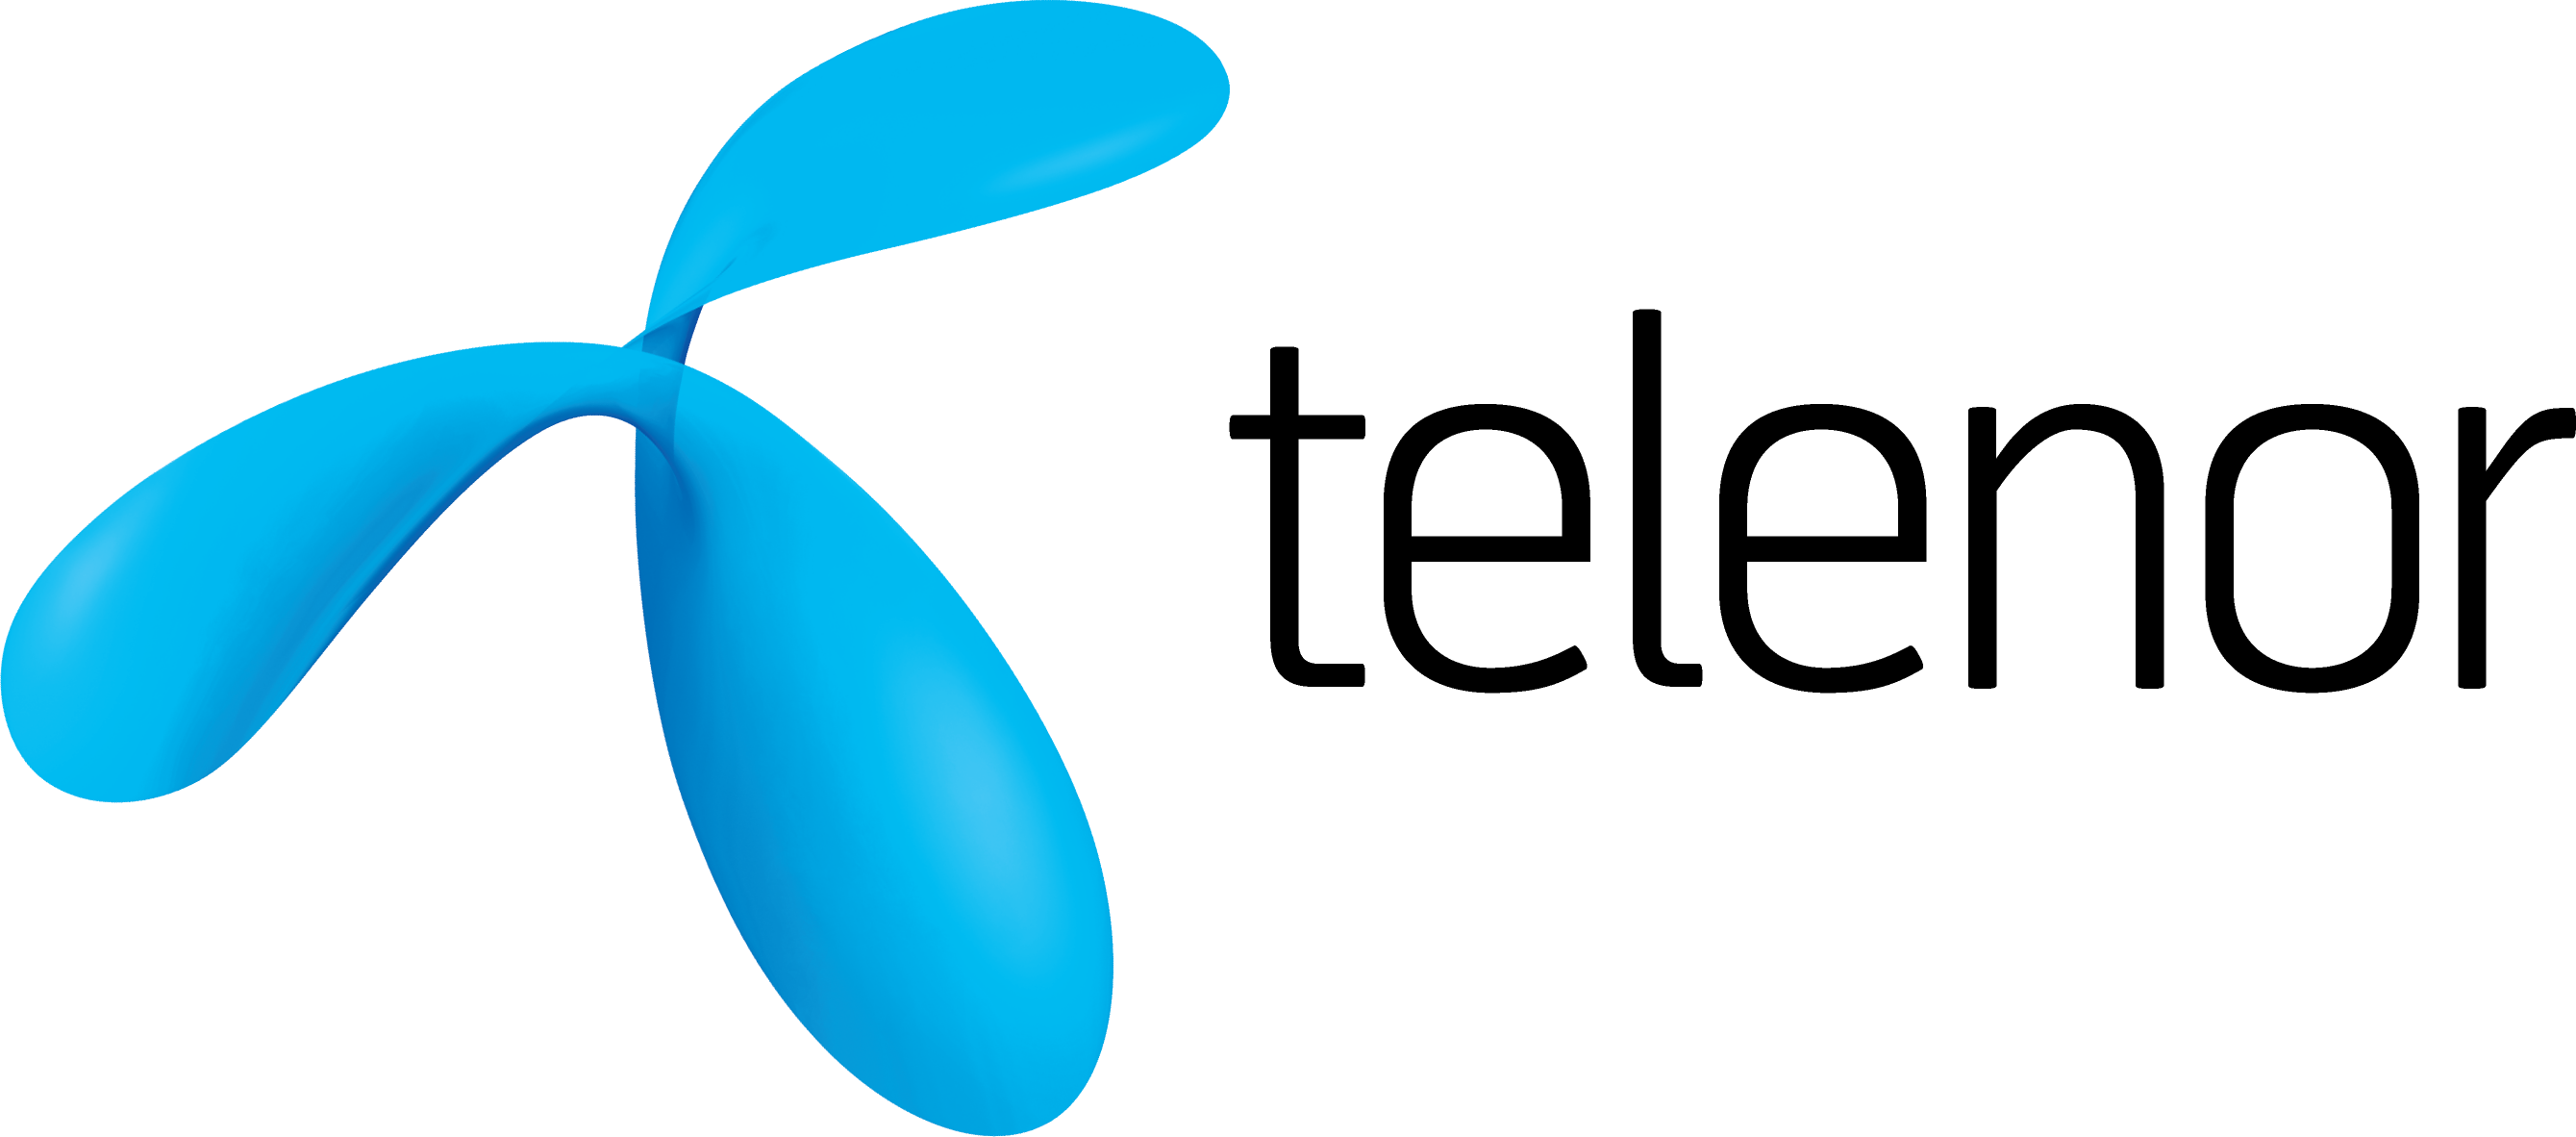 Telenor To Telenor Call Packages 2021 Daily, Weekly, Monthly